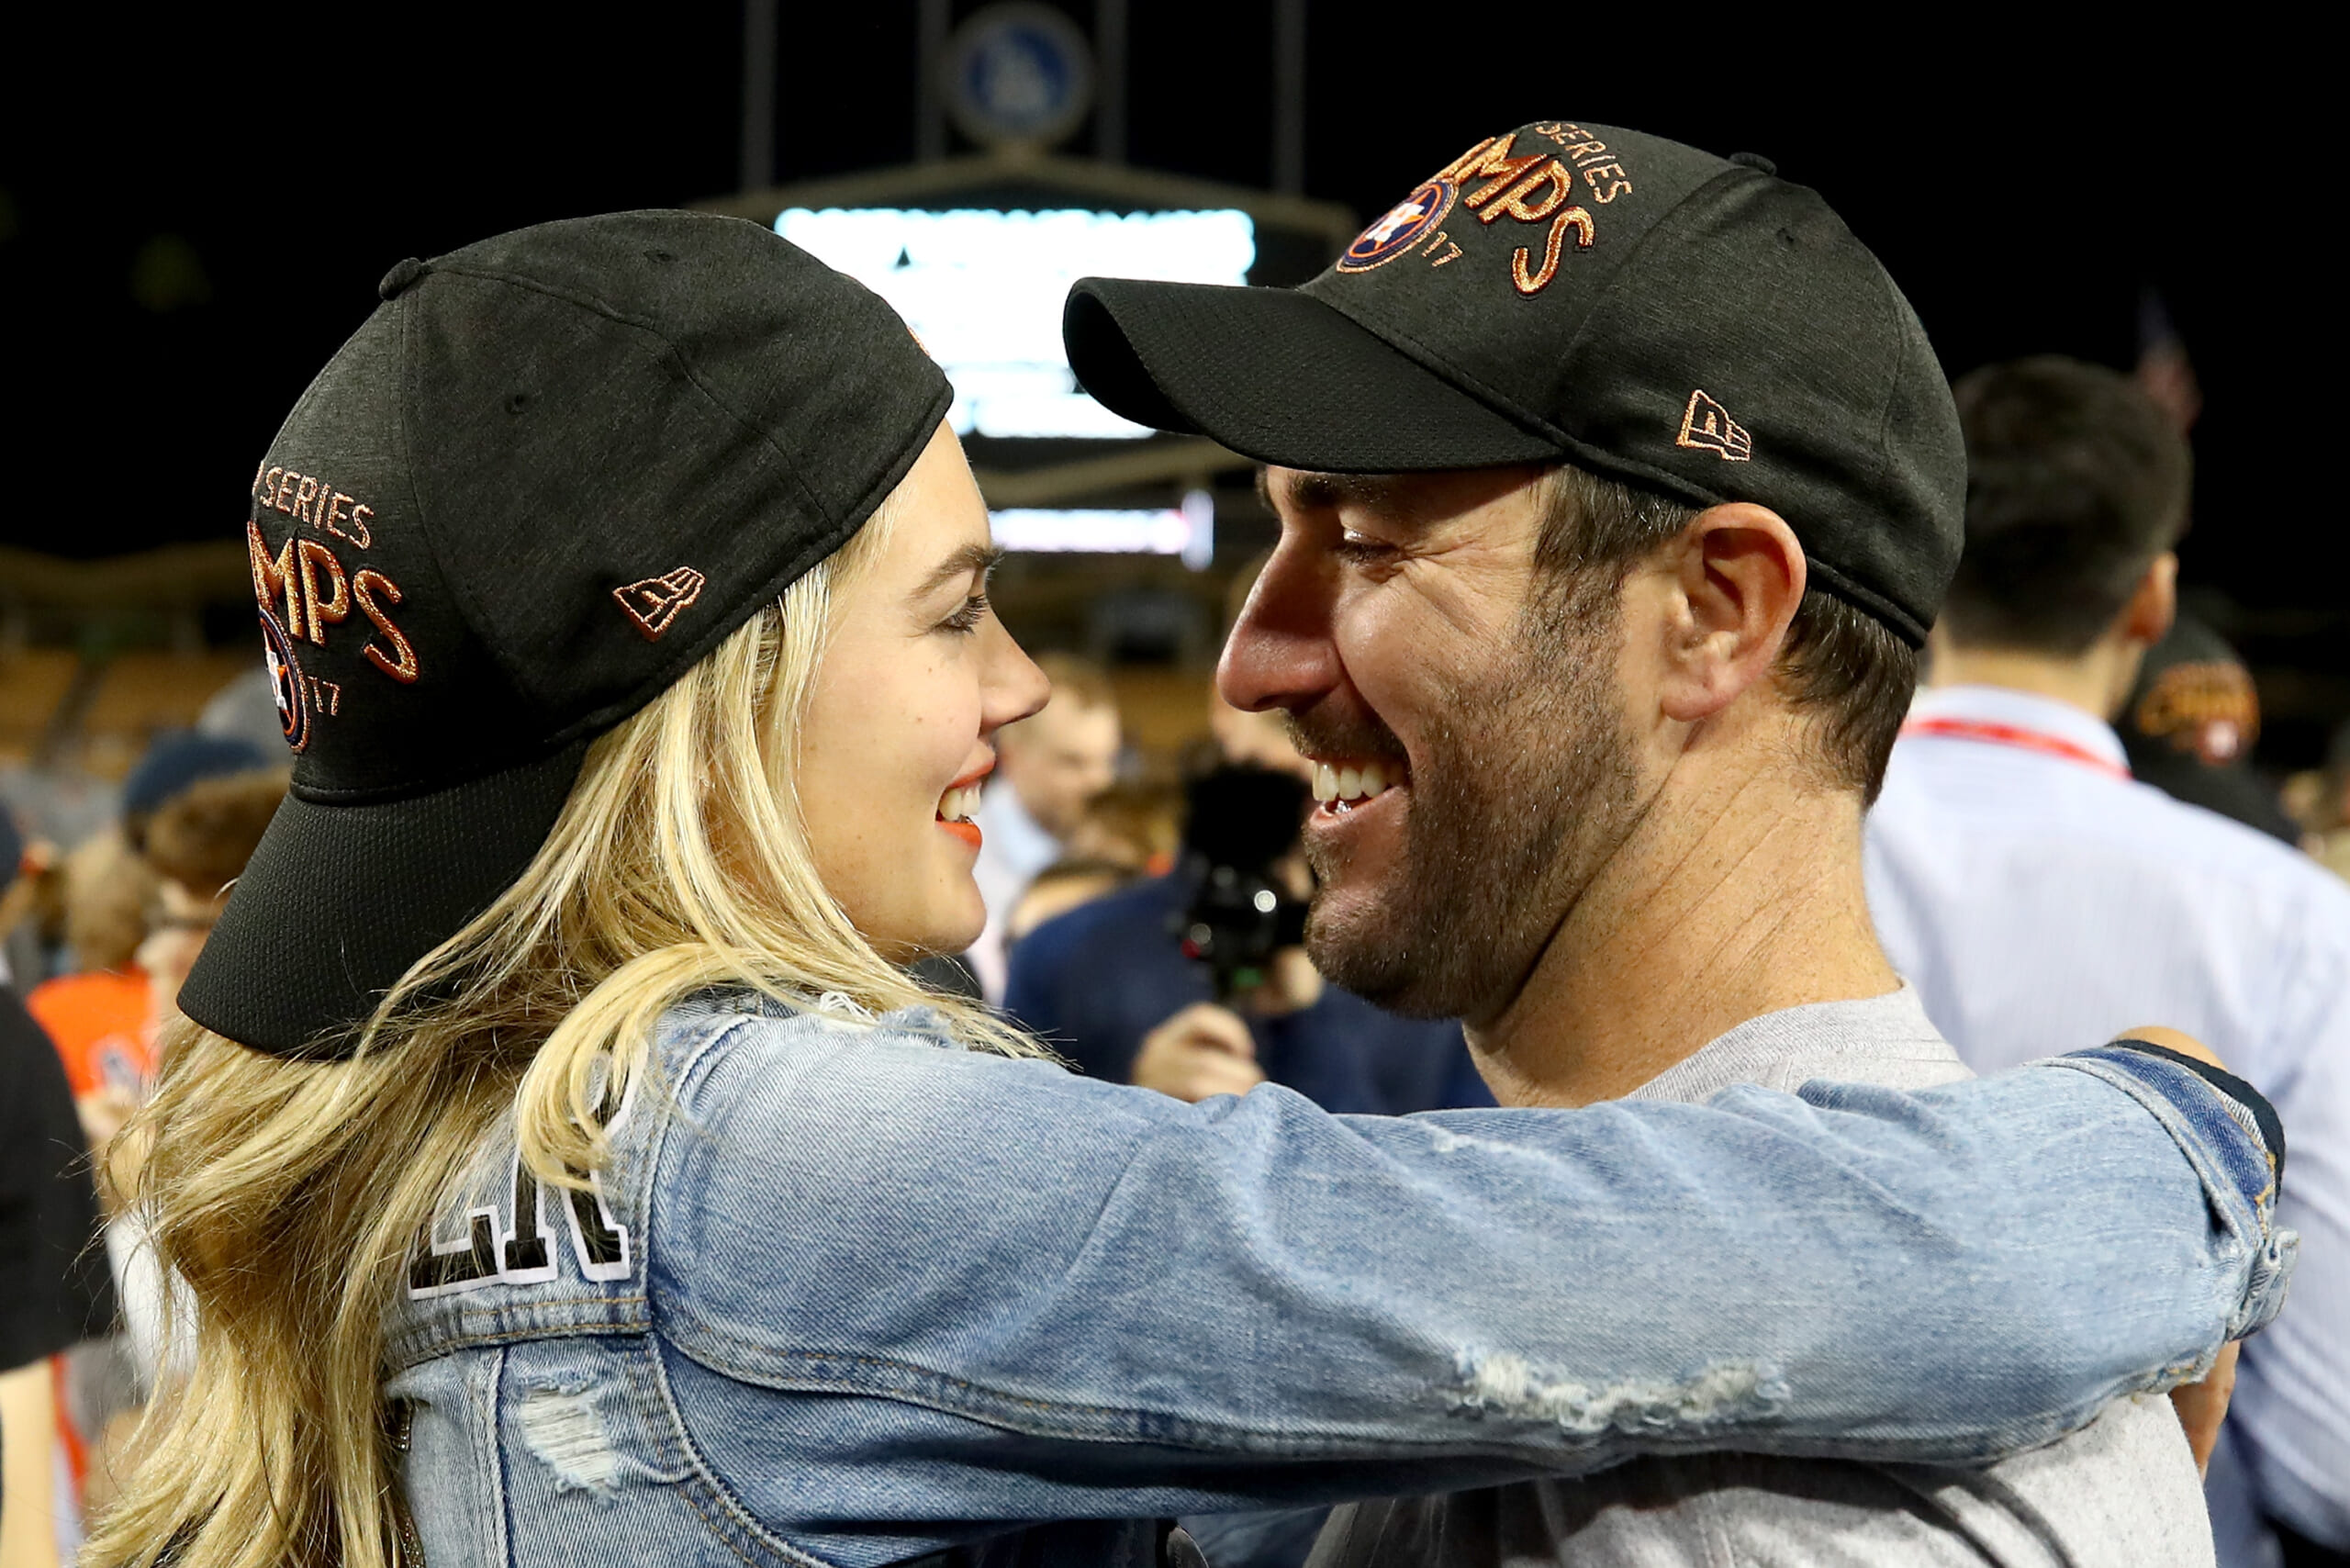 Kate Upton And Justin Verlander Celebrated The Astros World Series Win With Some On The Field